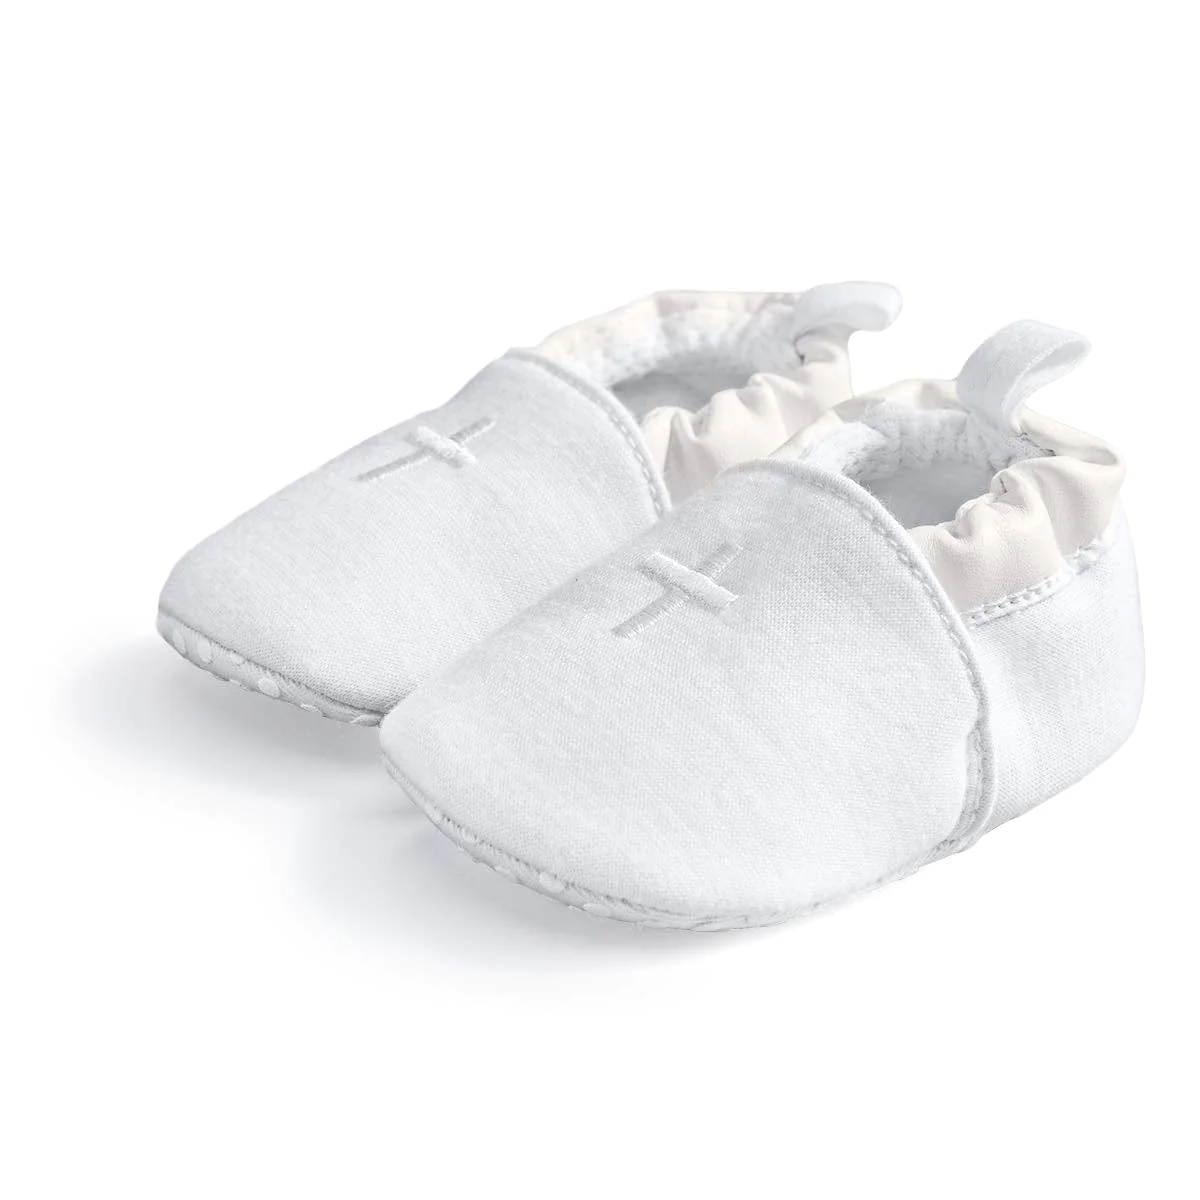 Baptism Shoes | Cool Baptism Gifts for Boys | Baby Journey